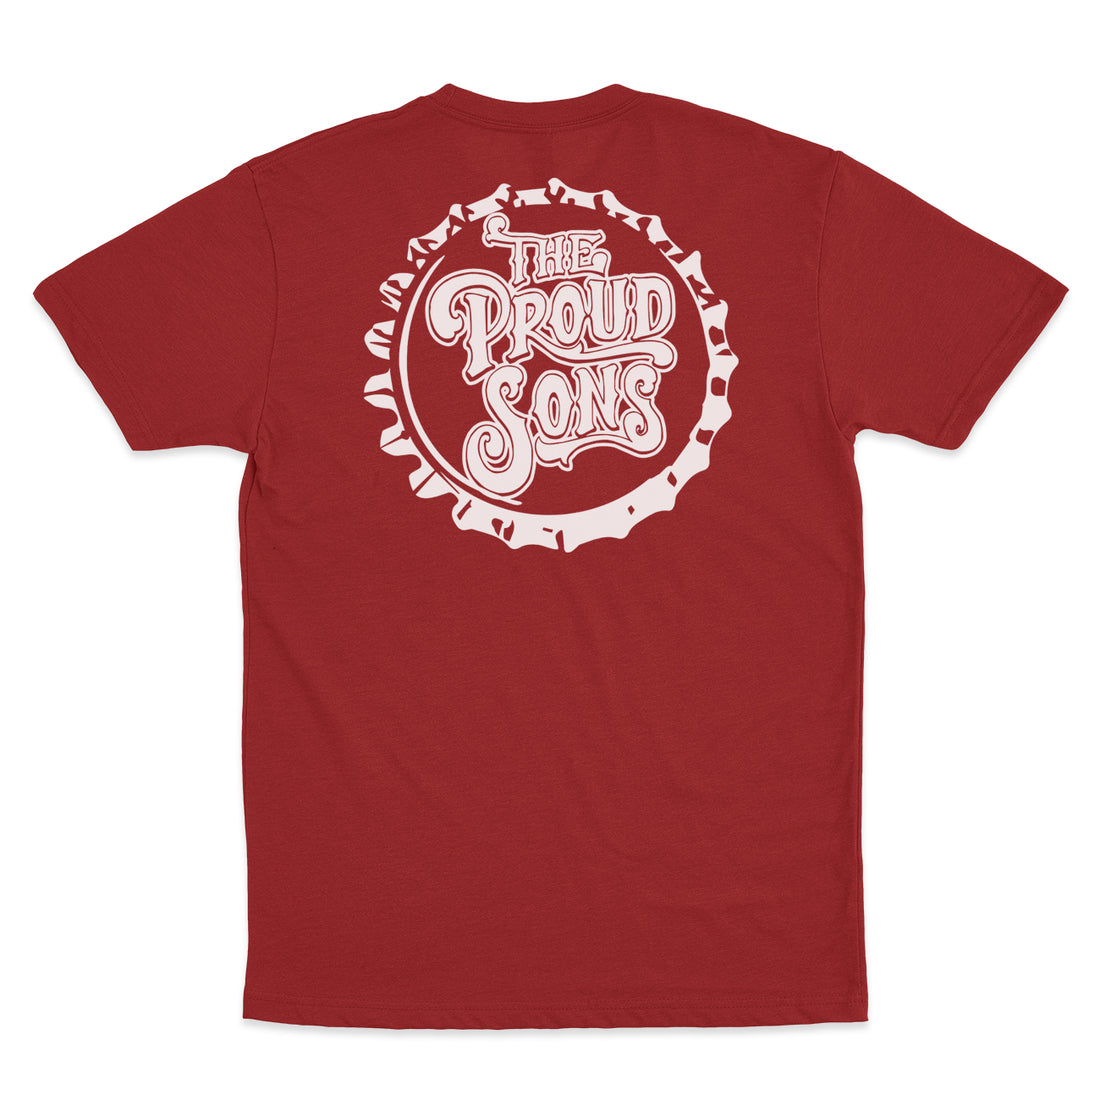 The Proud Sons - Bottle Cap - Cardinal Red Tee